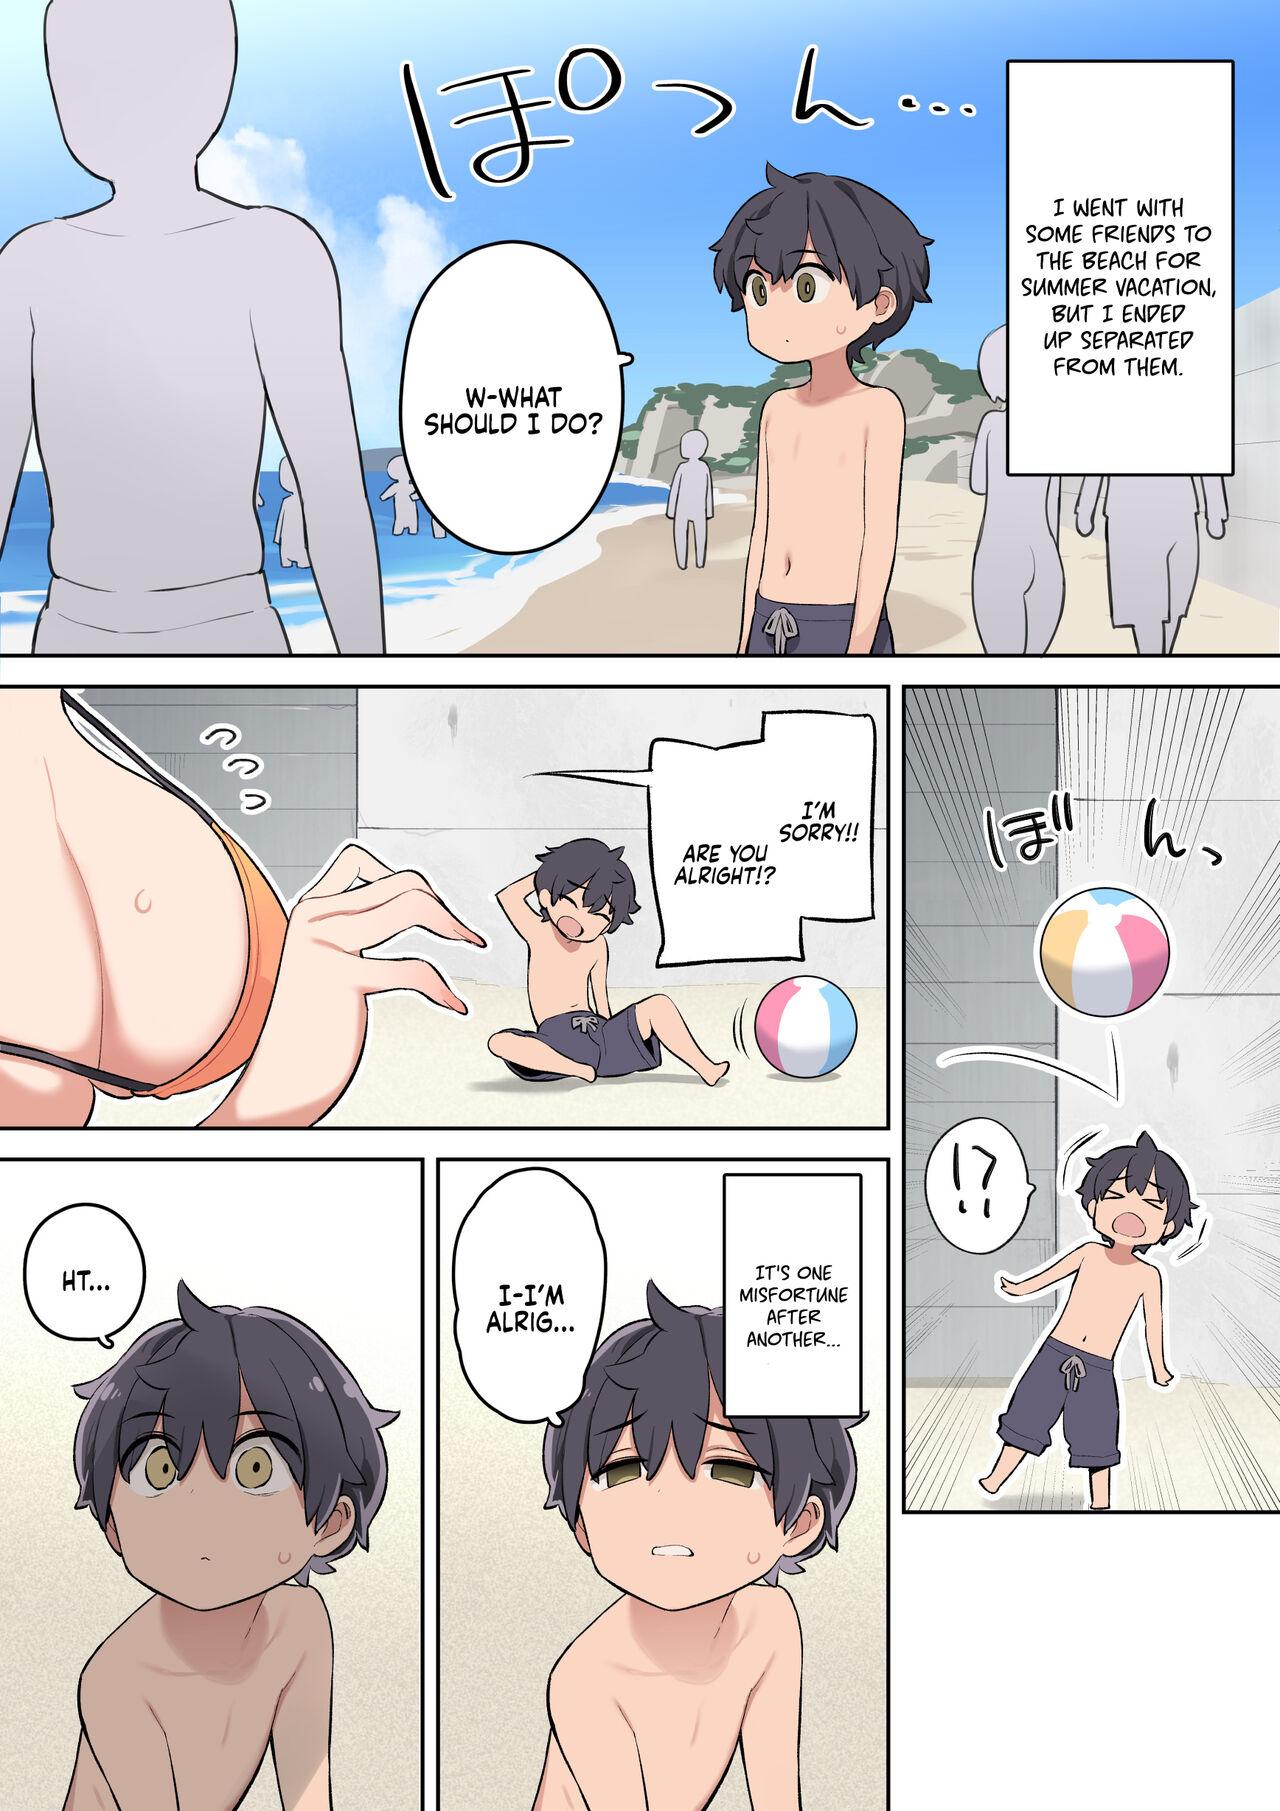 Coed Moshi Umibe de Ecchi na Onee-san to Deattara | If You Were to Meet A Sexy Lady at the Beach - Original Sister - Page 3